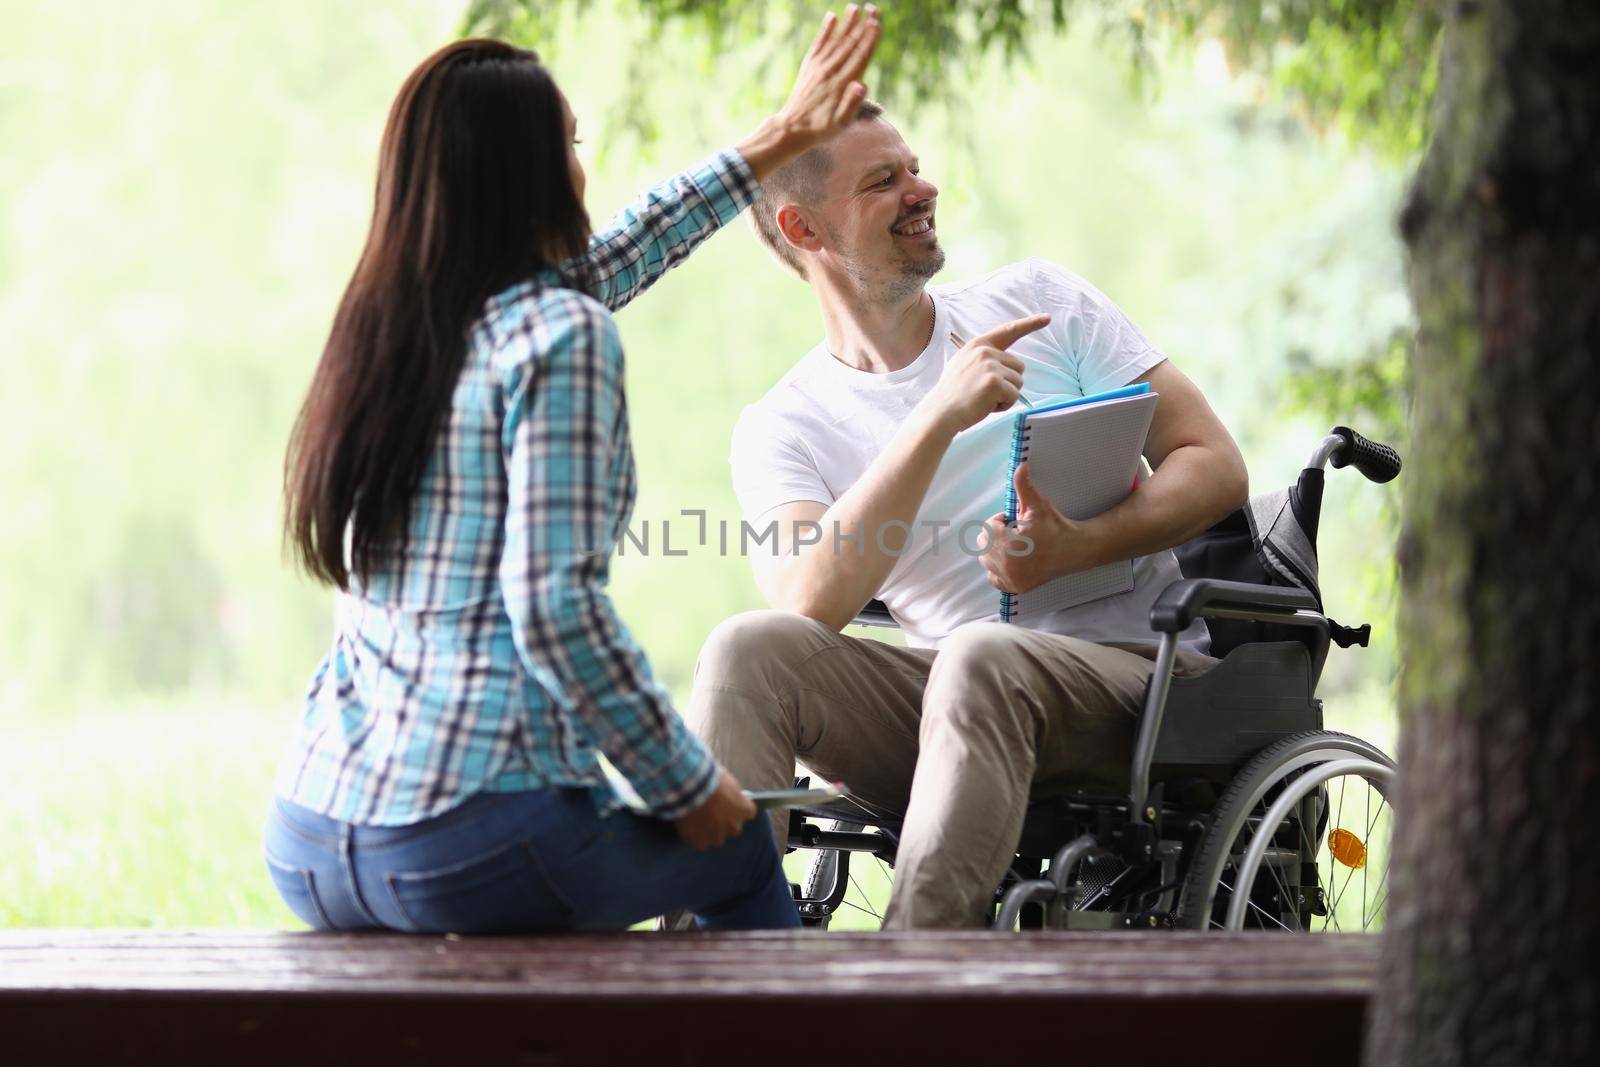 Portrait of woman and man in wheelchair wave hello to someone, people study in park, guy after accident get treatment. Leisure, recovery, nature concept